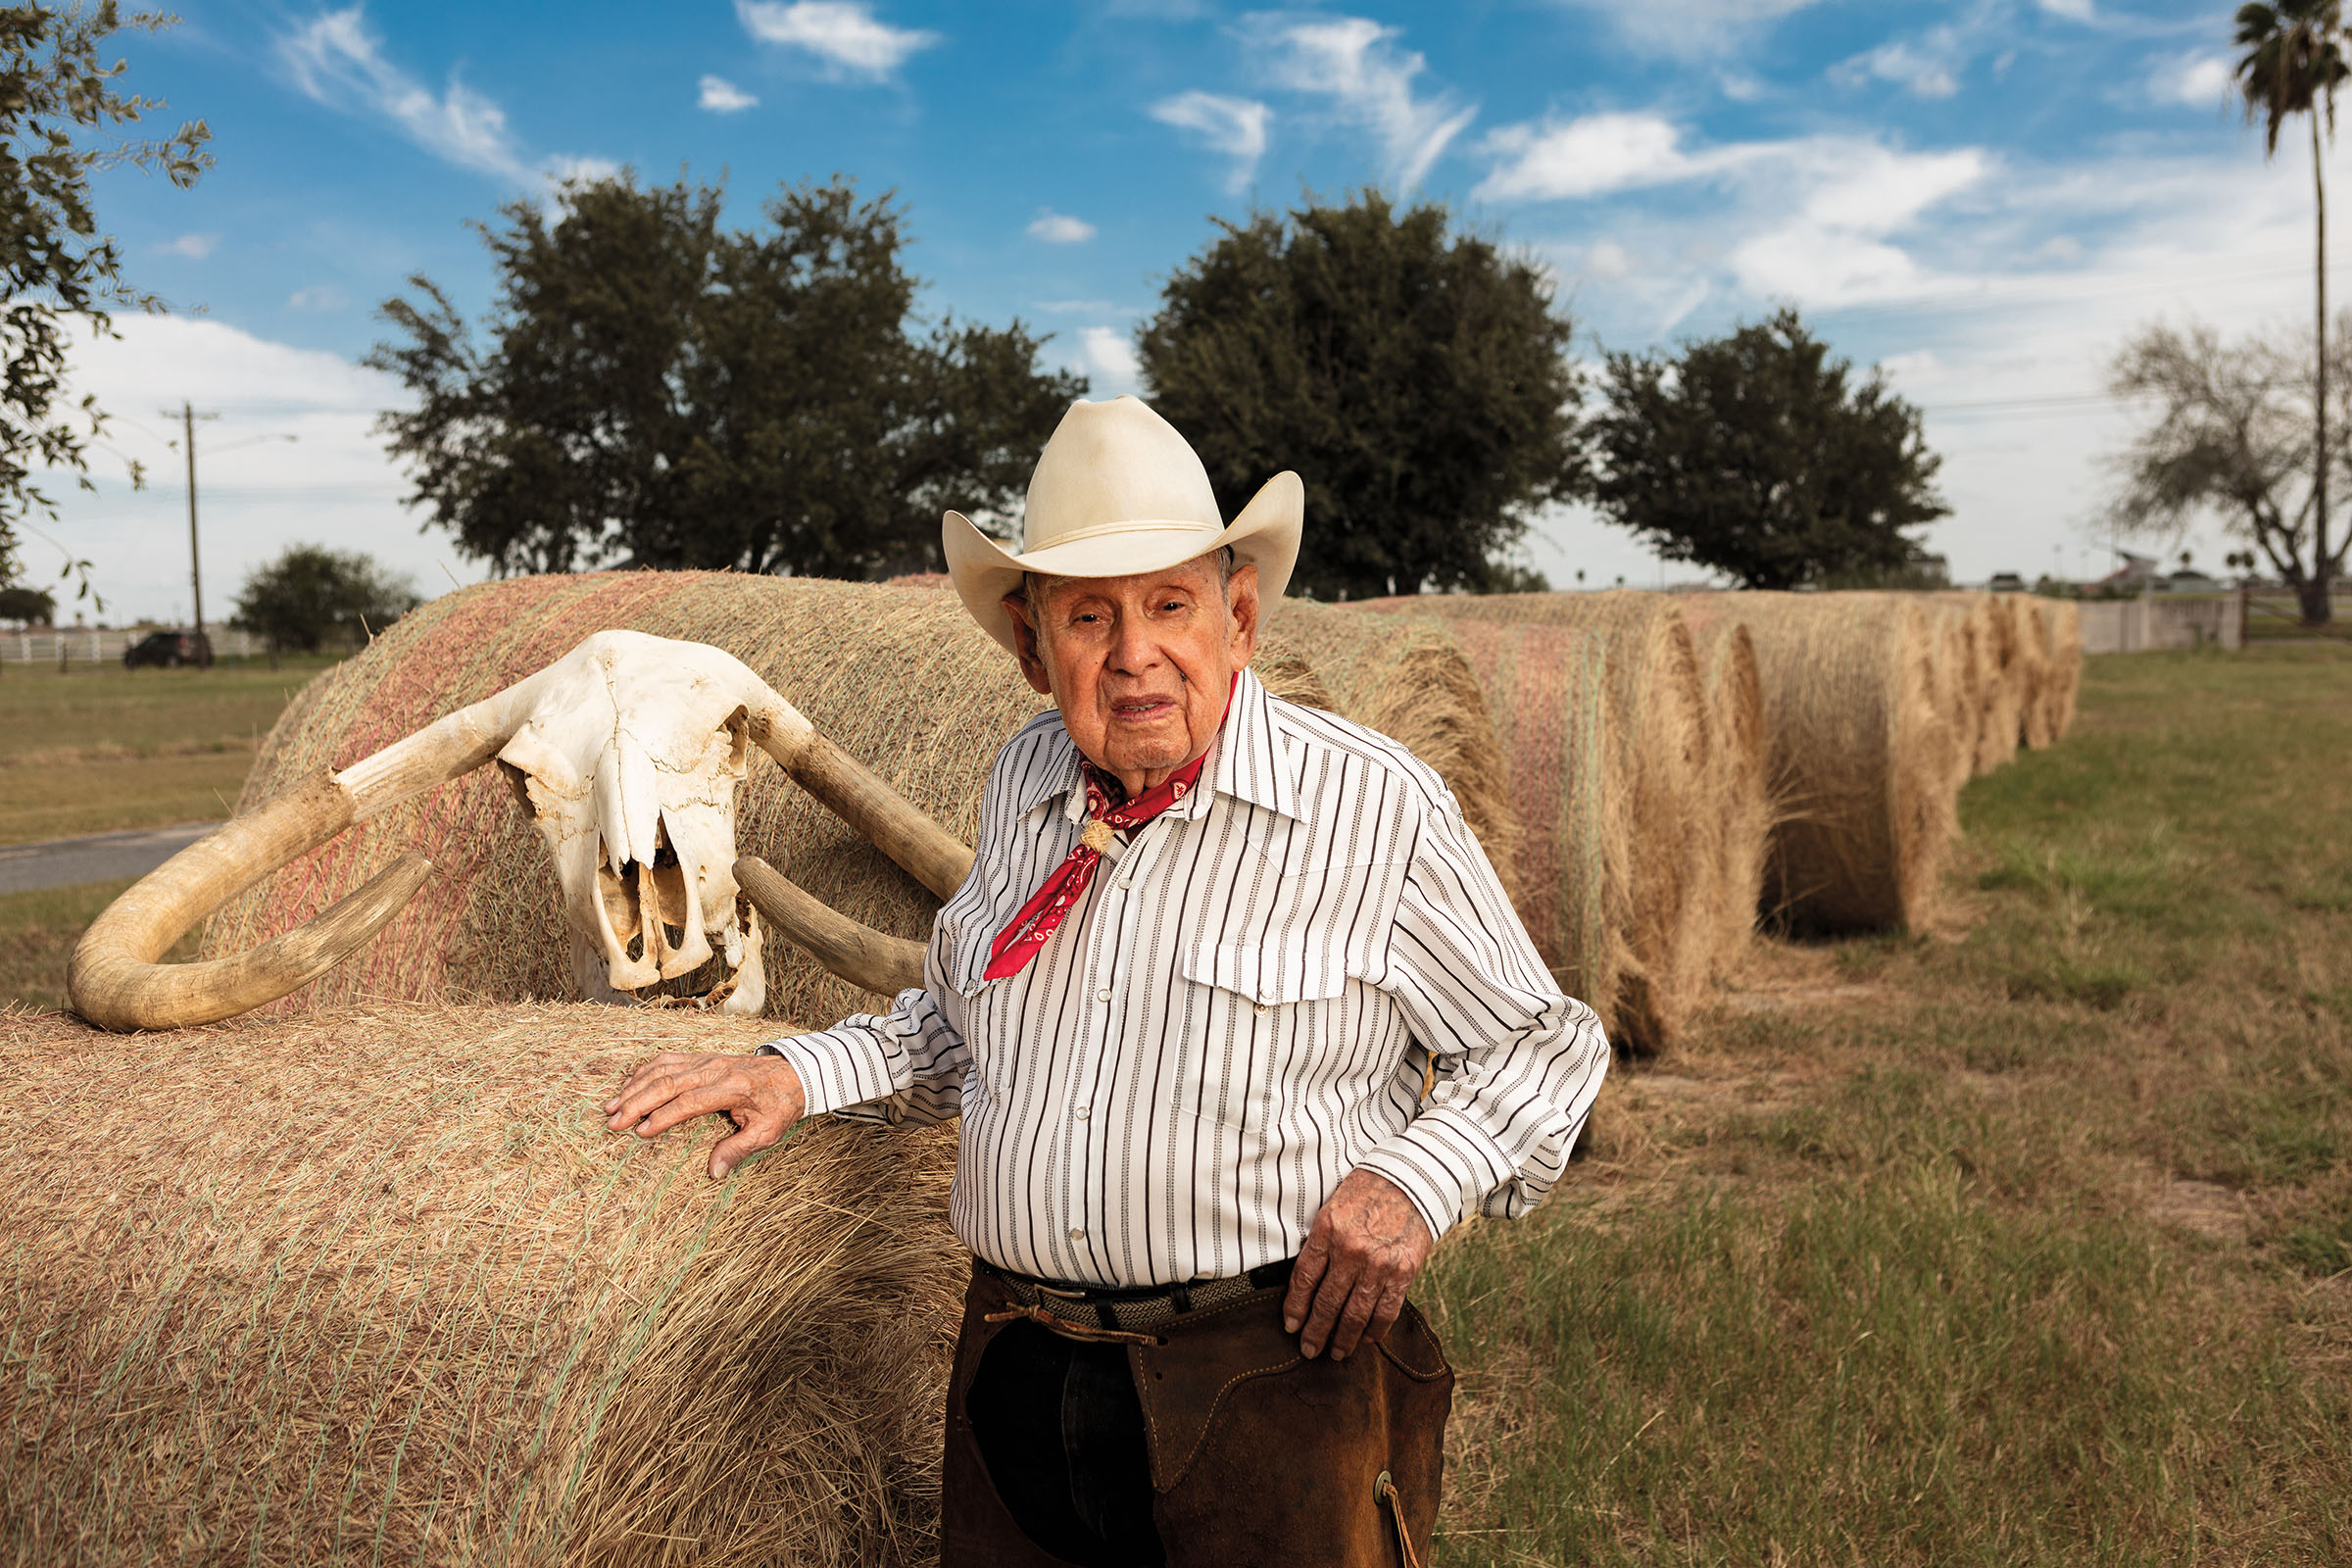 A sharply-dressed man in a white cowboy hat stands in front of large bales of hay and a cow's skull